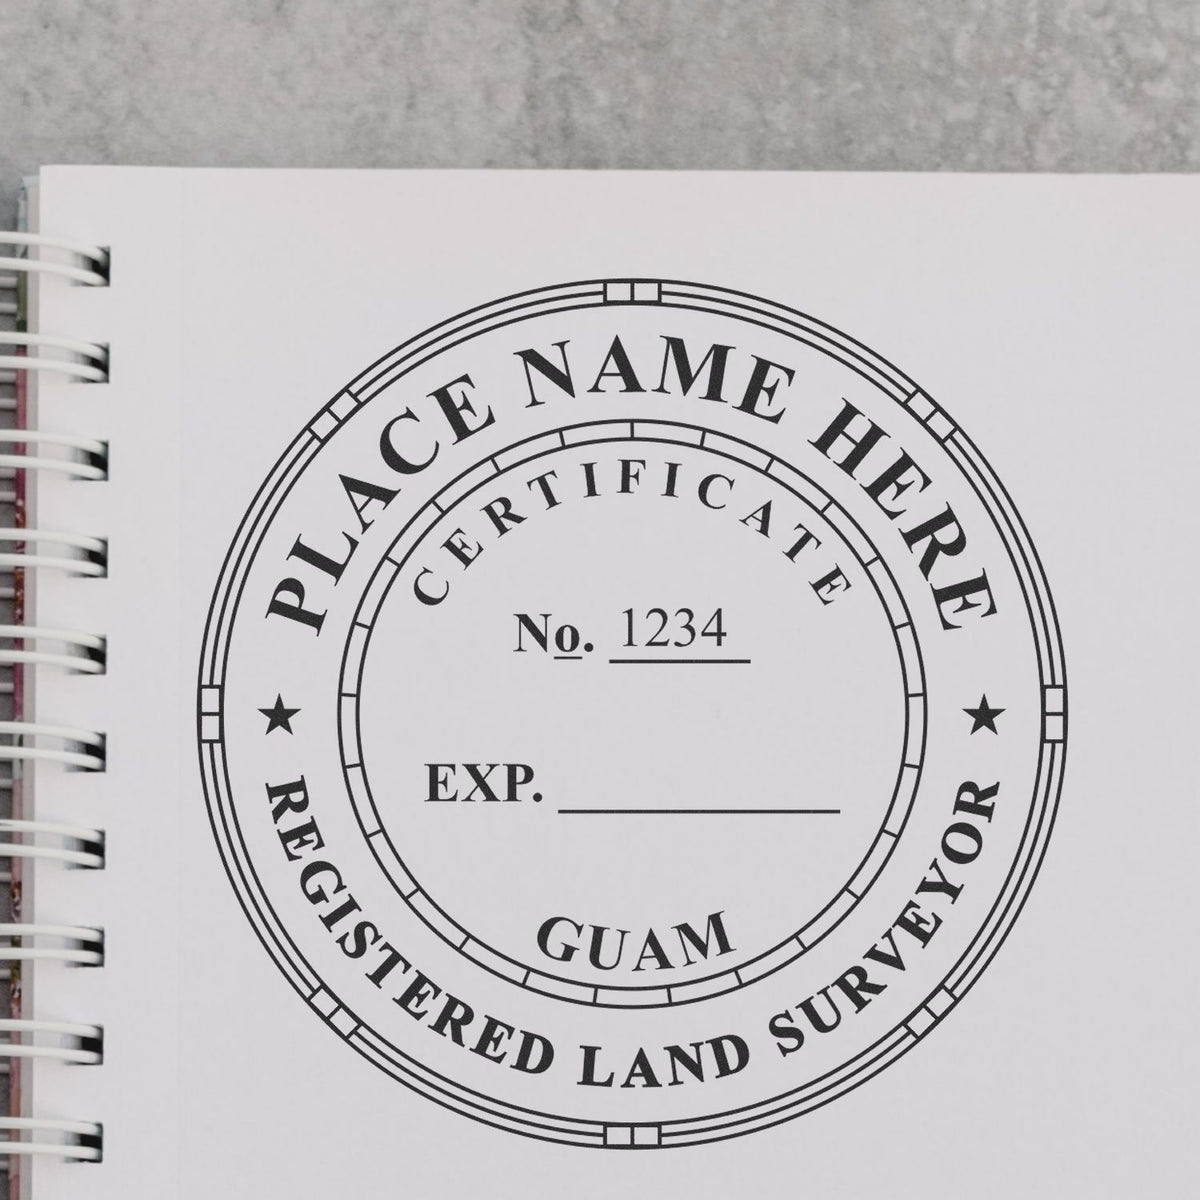 Slim Pre-Inked Guam Land Surveyor Seal Stamp in use photo showing a stamped imprint of the Slim Pre-Inked Guam Land Surveyor Seal Stamp